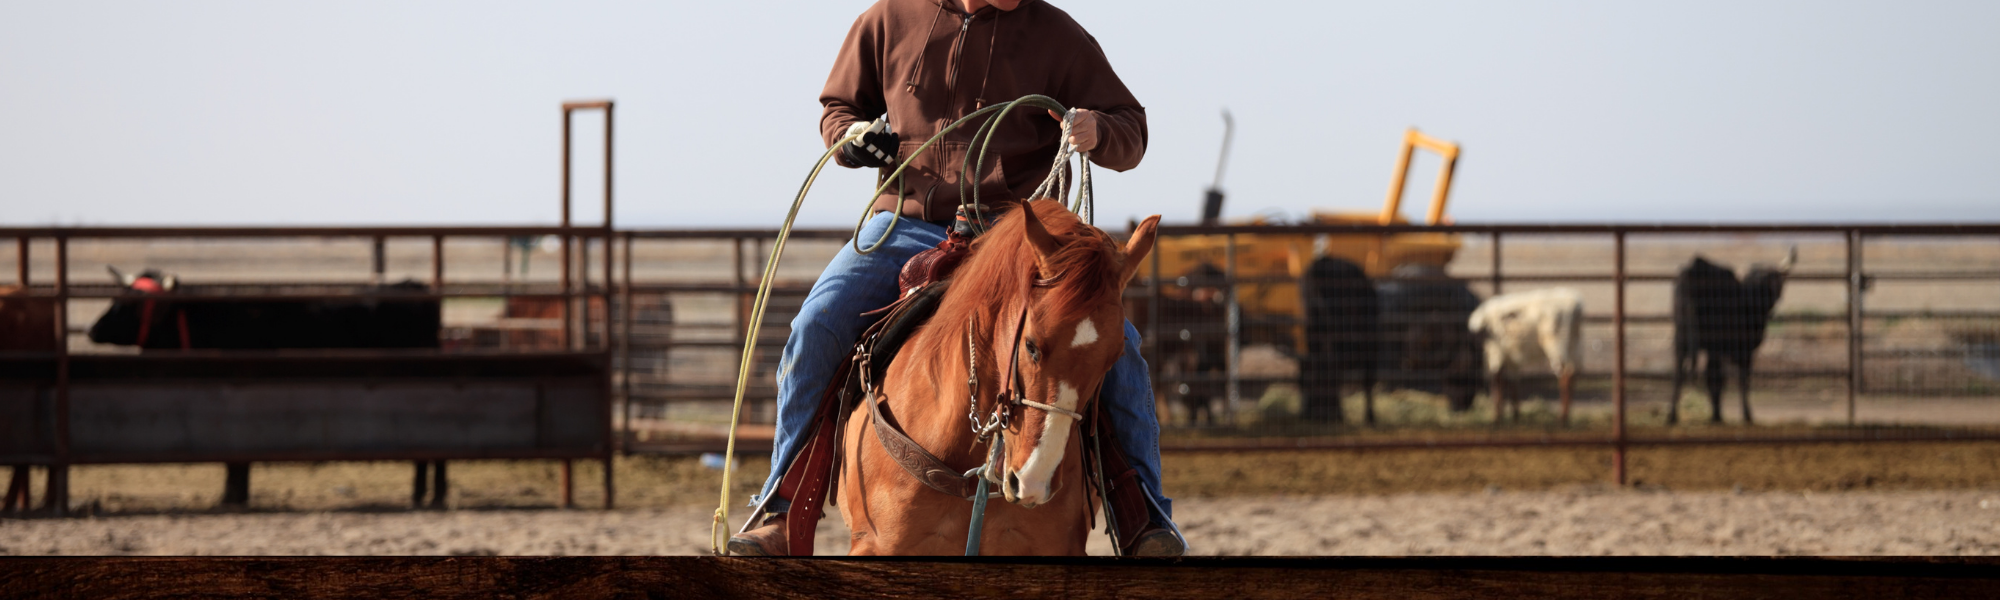 roping on a horse 